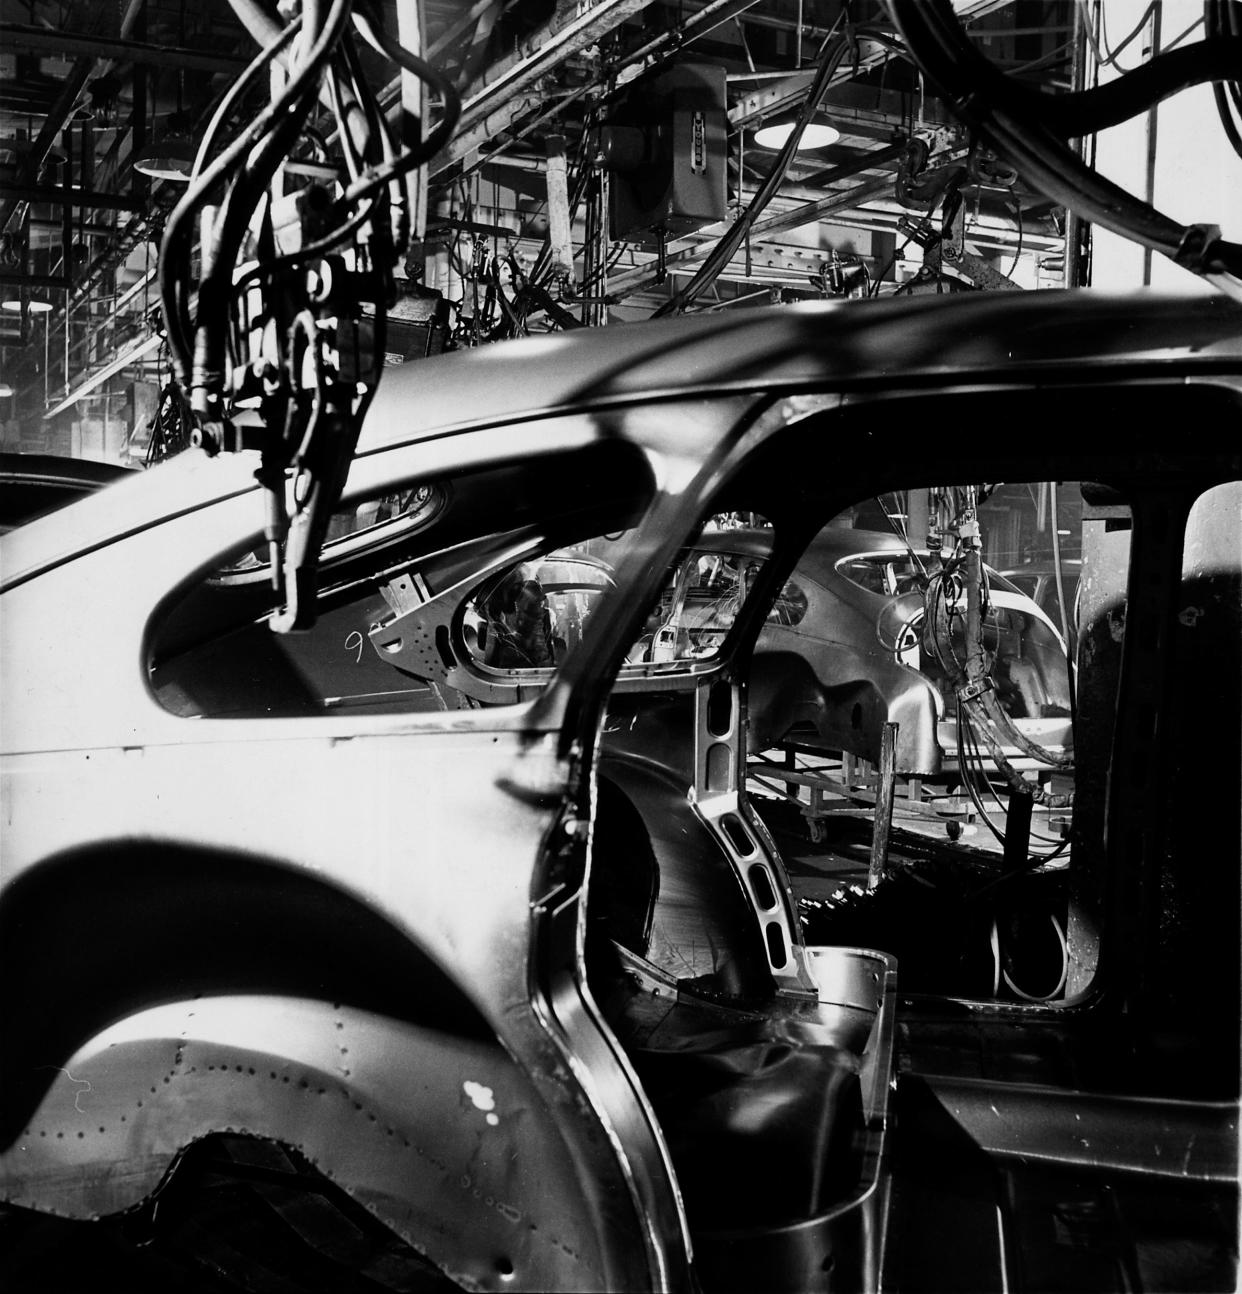 Section of body of car on assembly line at Nash Automobile Factory, November 1, 1950.